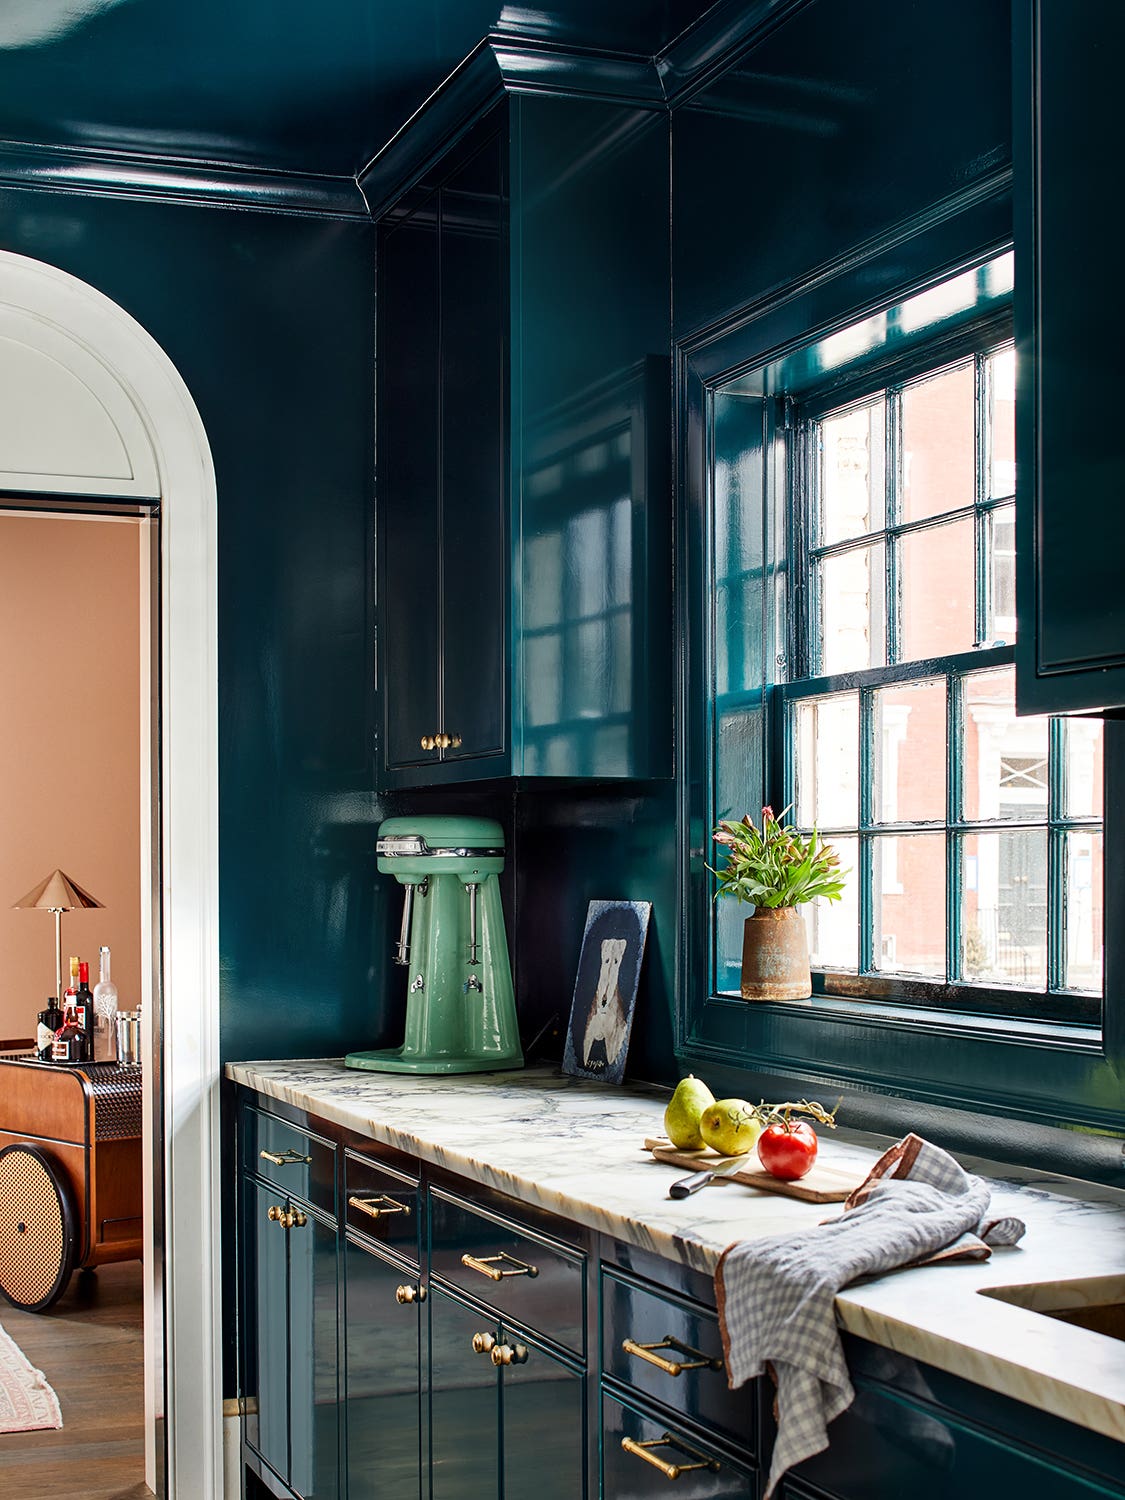 Searches for This Ceiling Paint Trend Have Grown by 816%